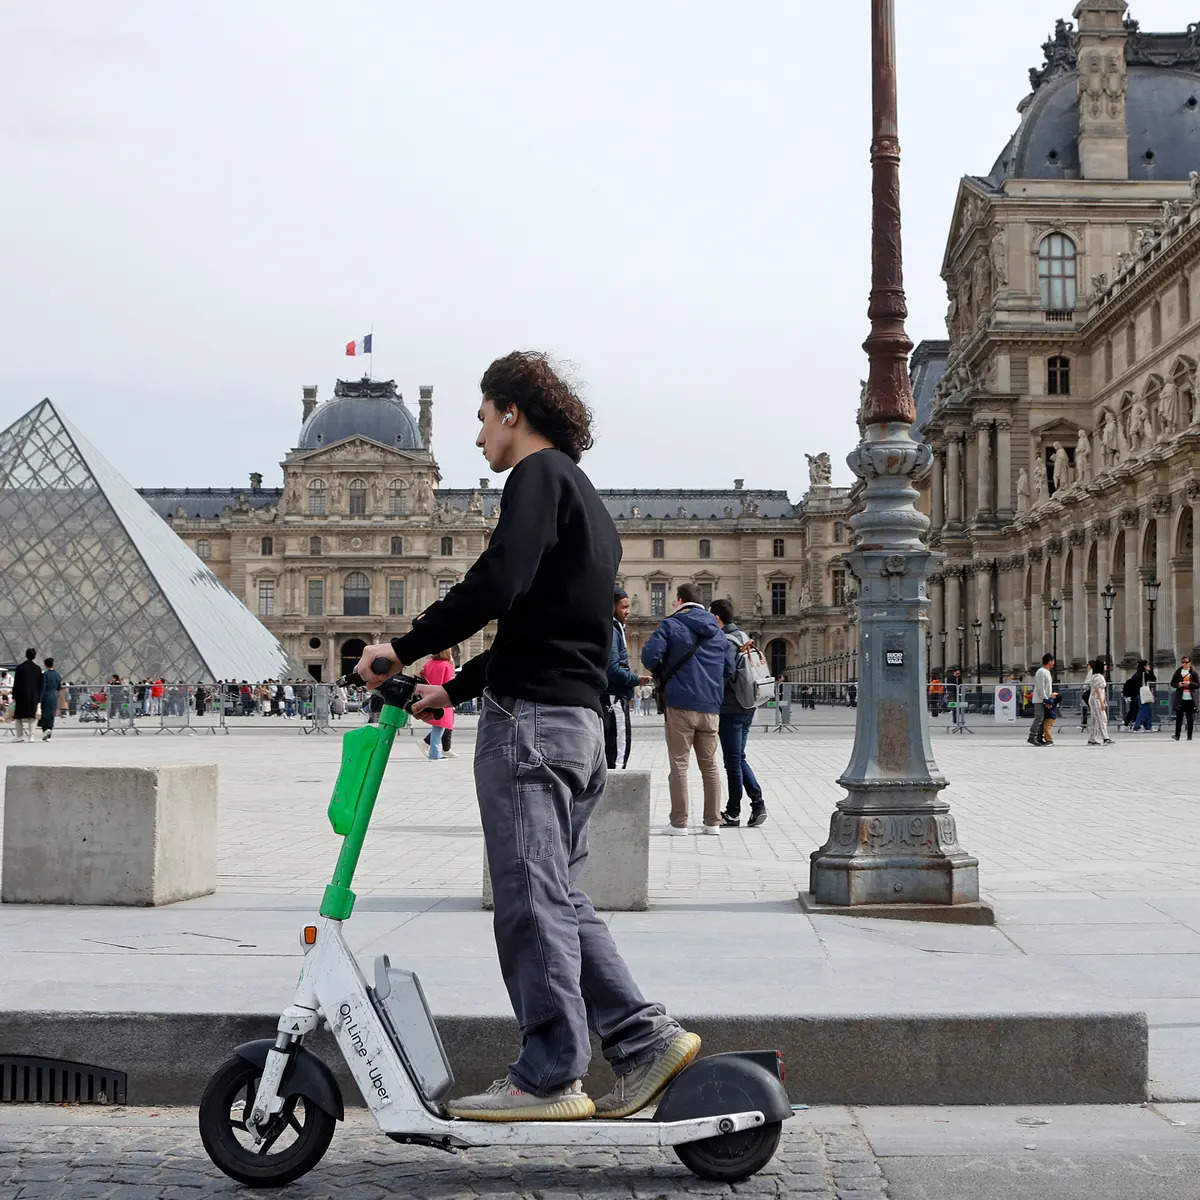 <p>While users hail them as eco-friendly ways to avoid gridlock, detractors consider them as an unsightly menace with the power to maim and kill</p>